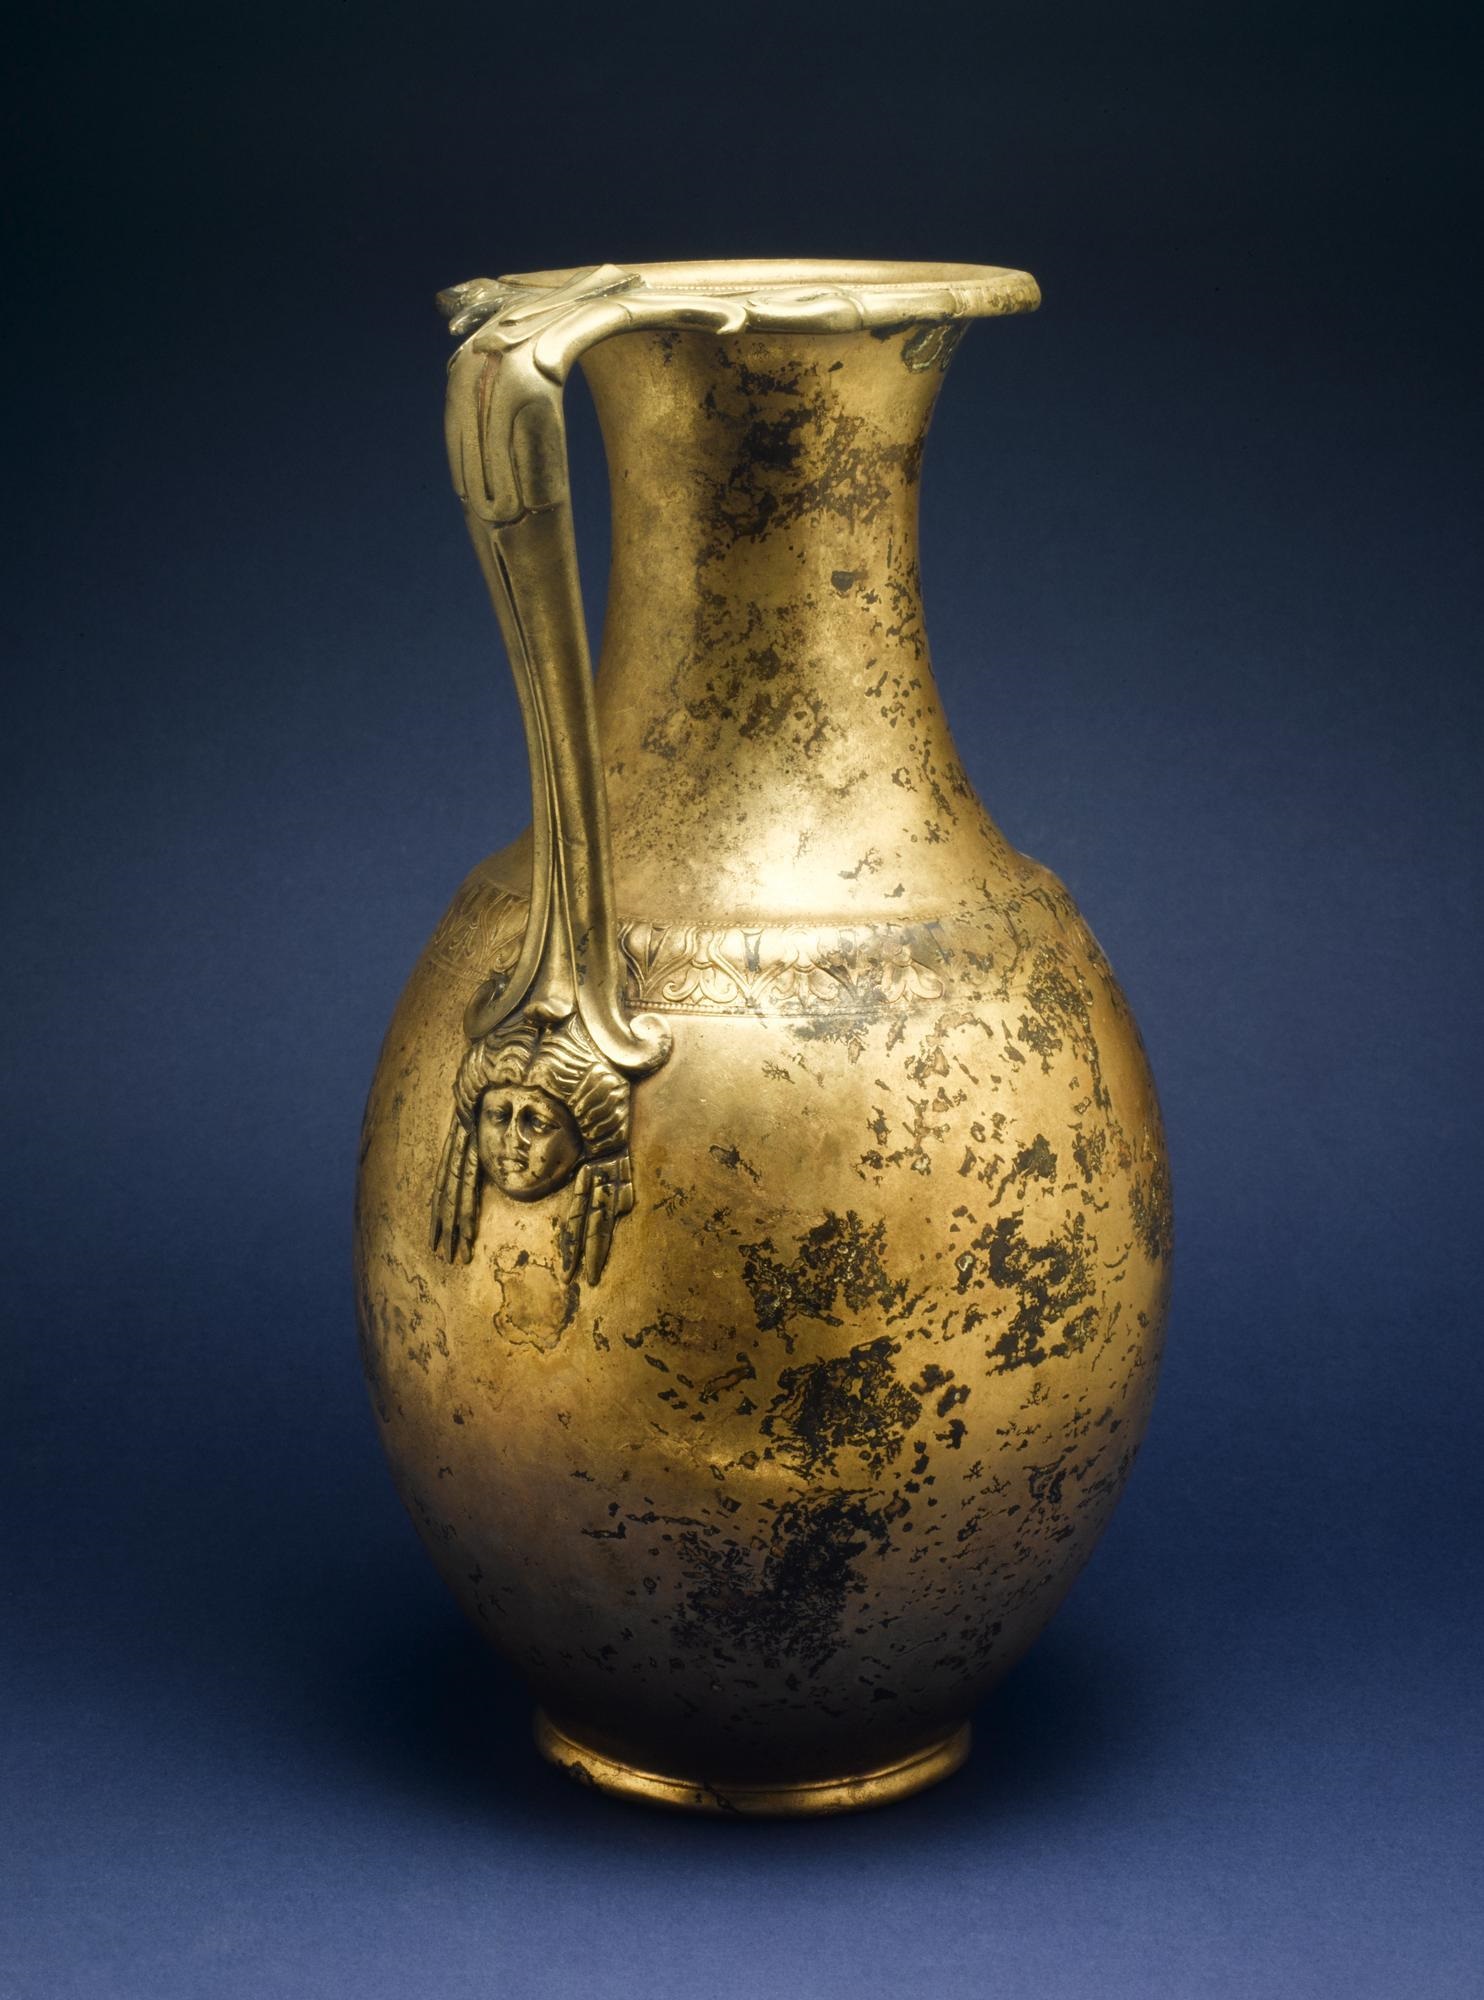 A tall, slender, and bright gold-coloured jug against a royal blue background. The jug is elegant, with a face with curly hair below the handle. Patches of darkened wear cover about one third of the surface.